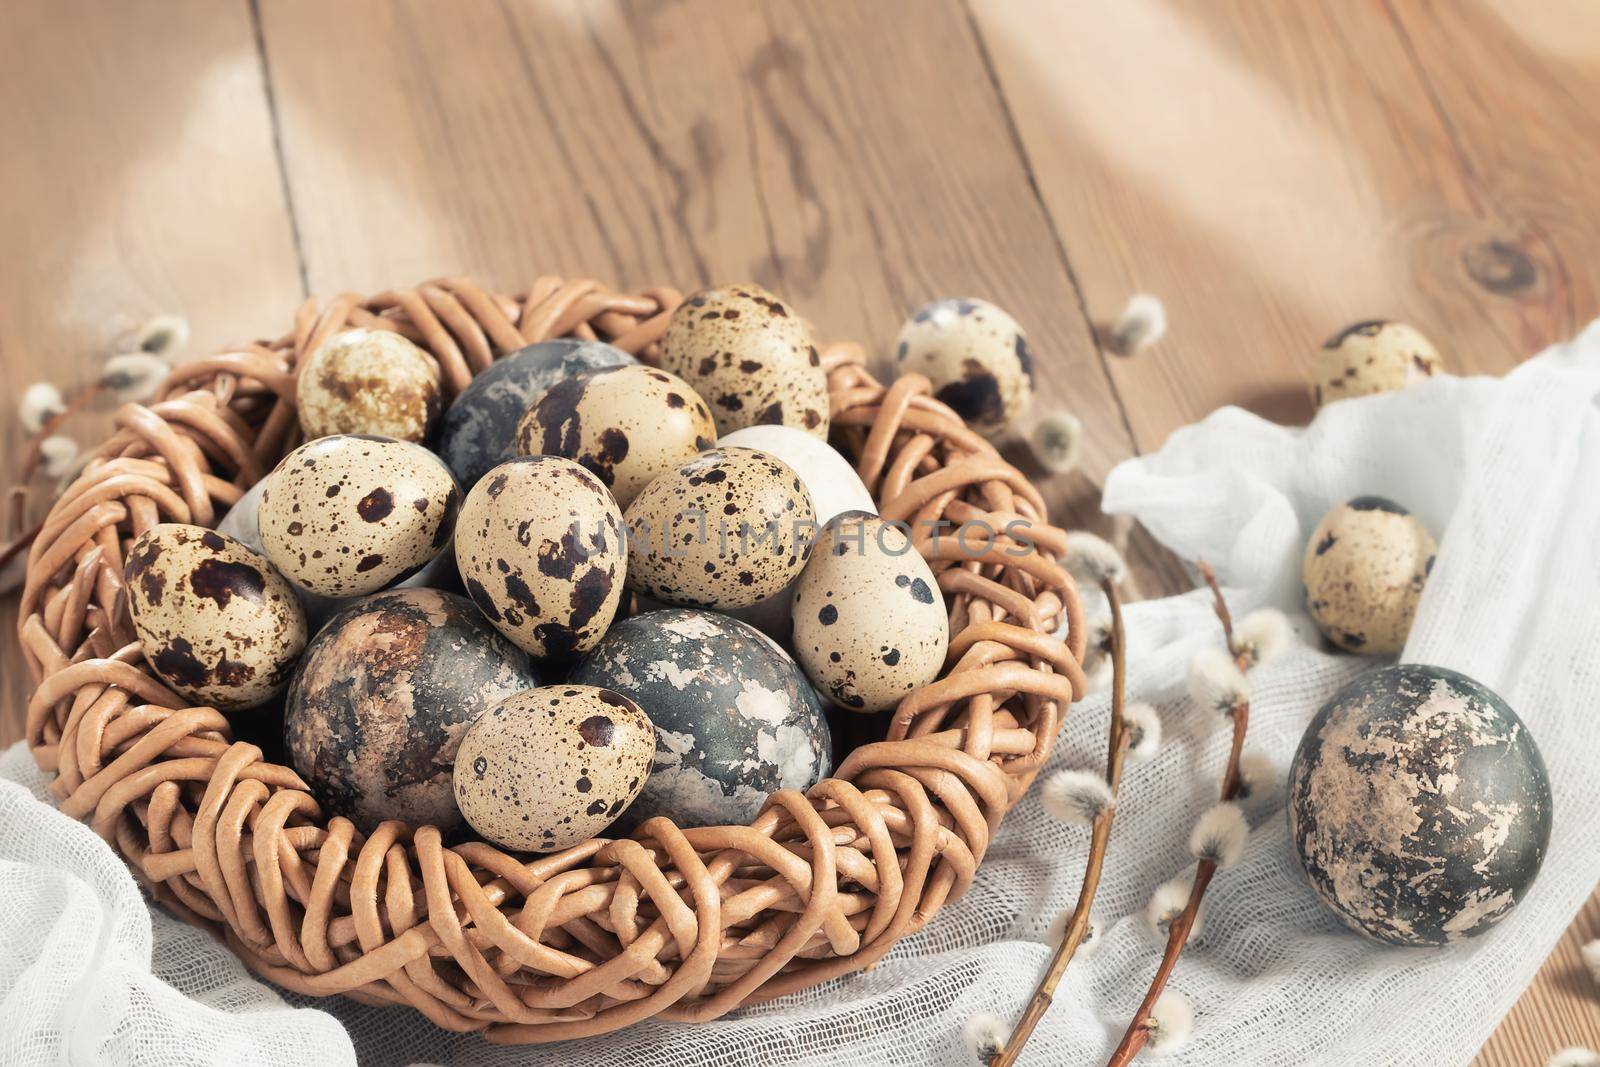 Easter composition - Easter eggs painted with natural dyes in a wicker nest on a wooden table, copyspace by galsand